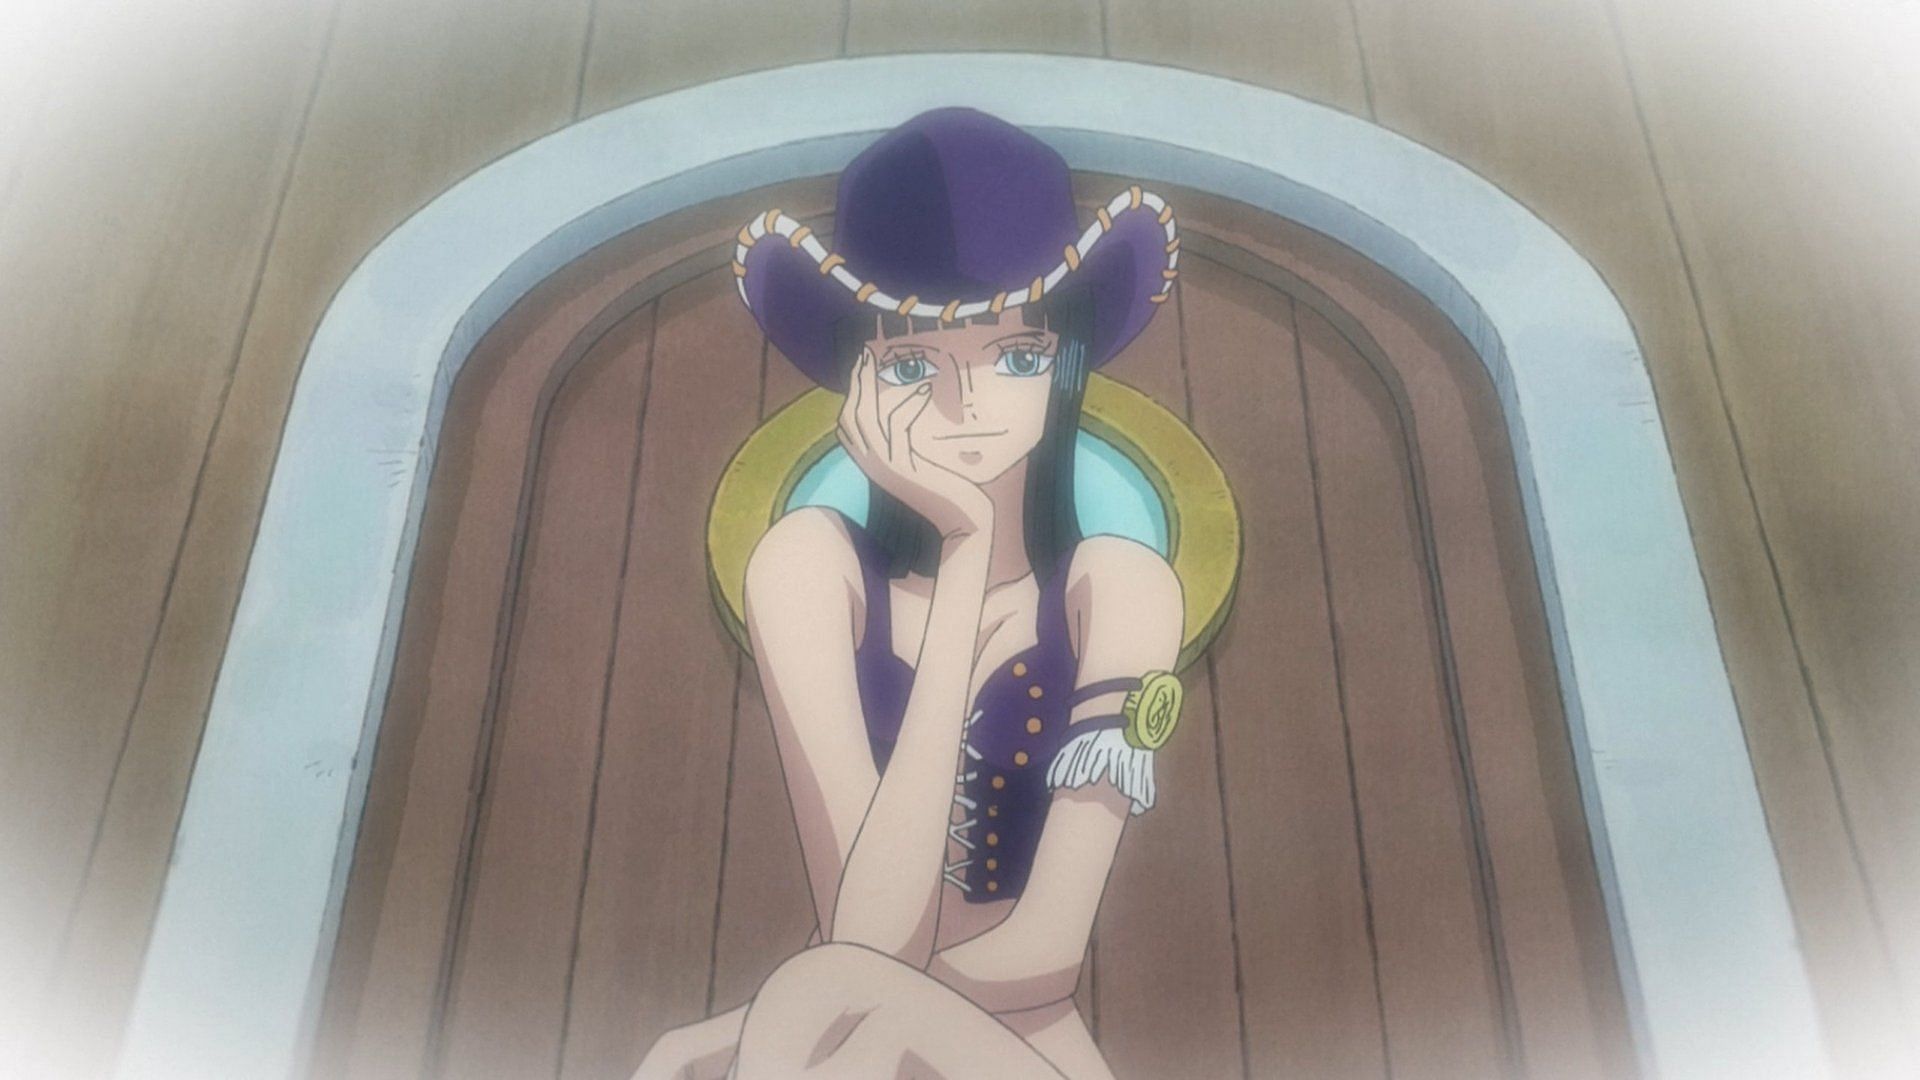 Miss All Sunday as seen in her initial introduction in One Piece (Image via Toei Animation)